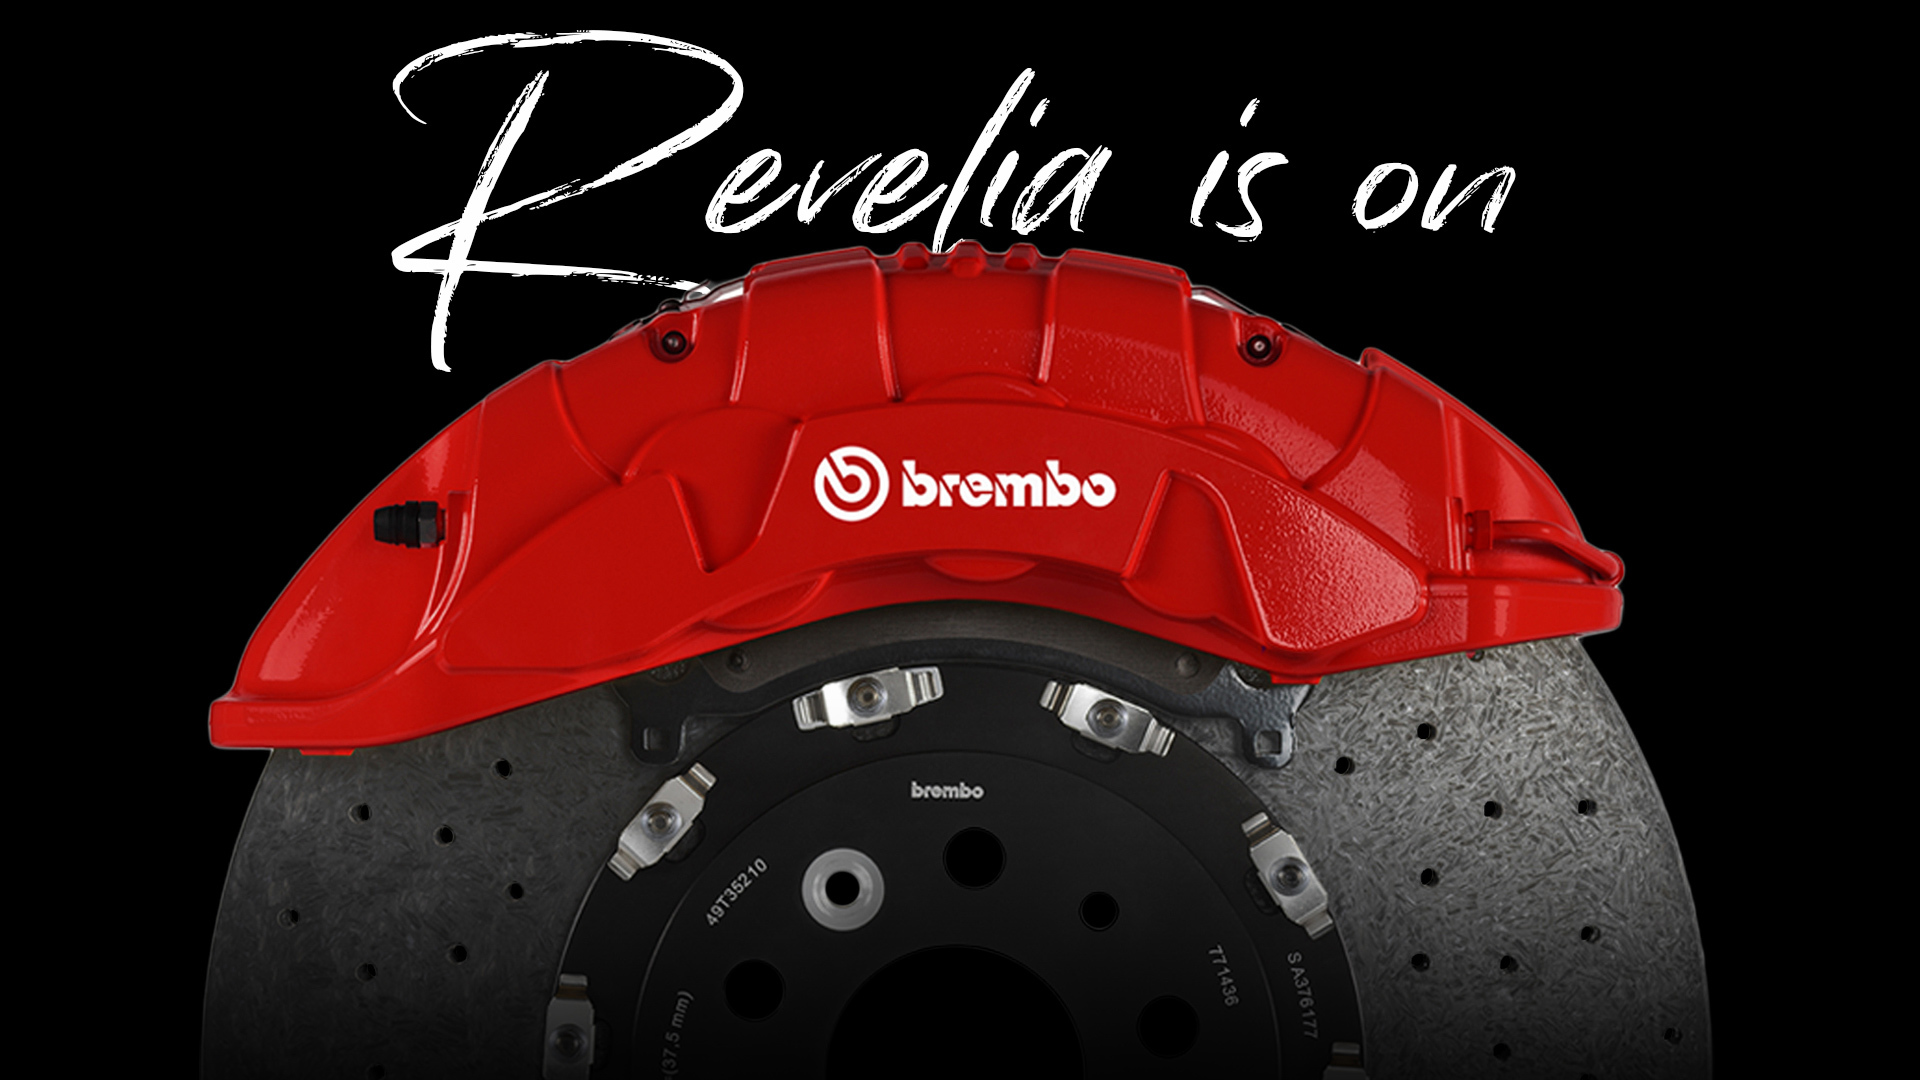 New products and feature on Brembo's e-commerce platform Revelia